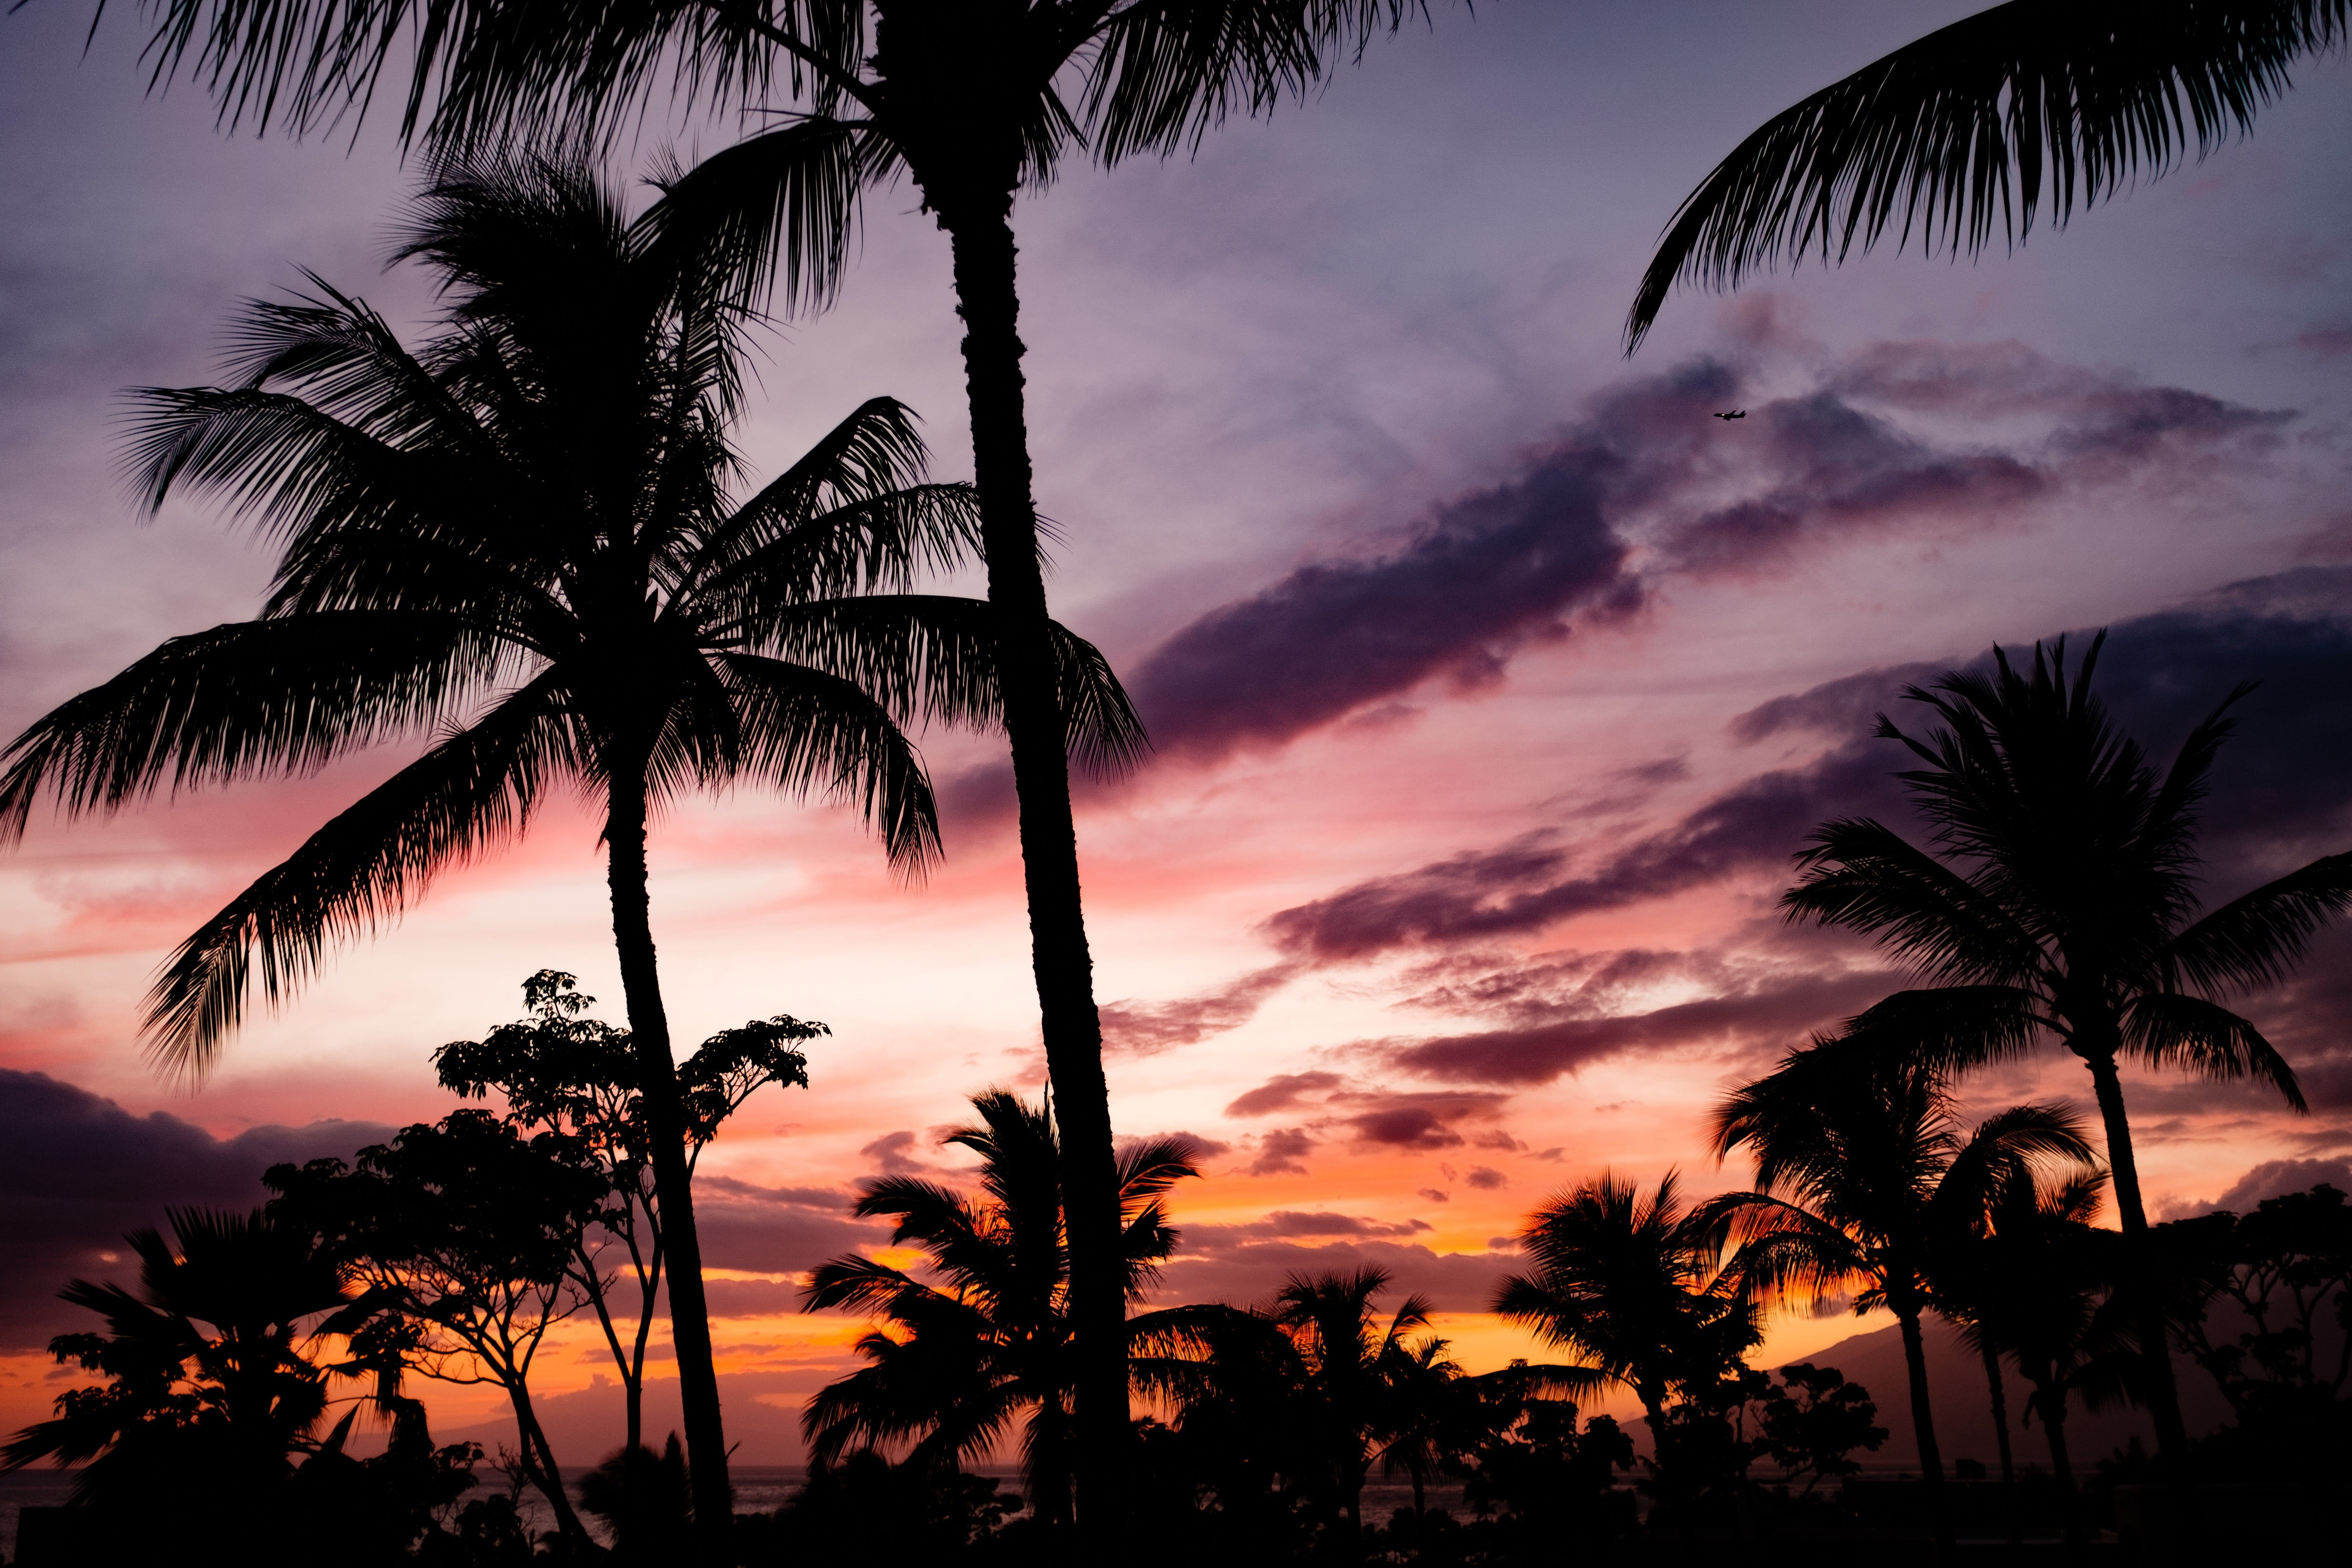 nature, trees, palm trees, sky, clouds, sunlight, tropical climate